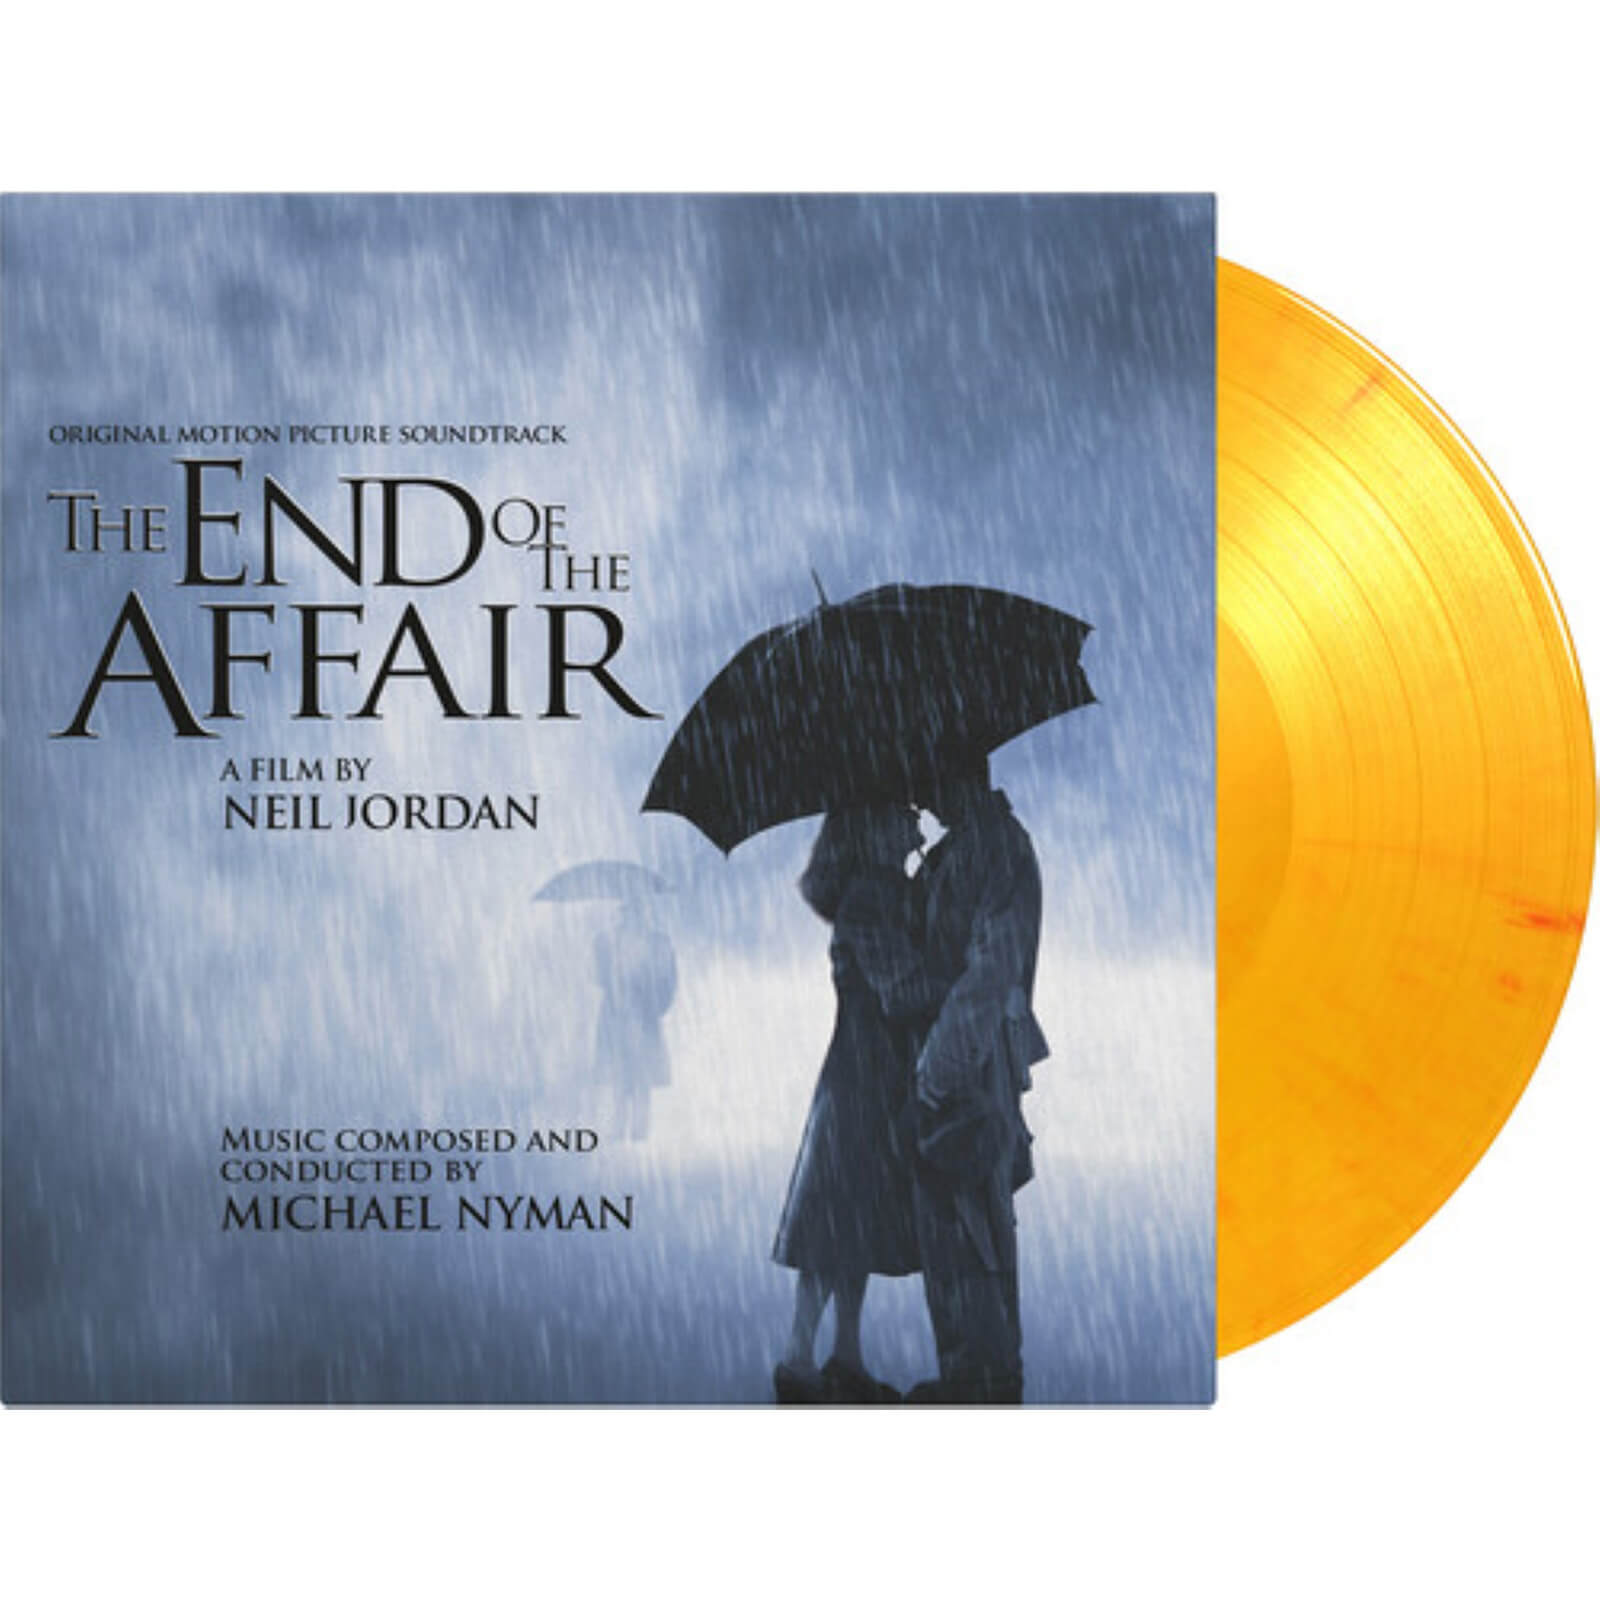 The End Of The Affair (Original Motion Picture Soundtrack) 180g Vinyl (Flaming Yellow)